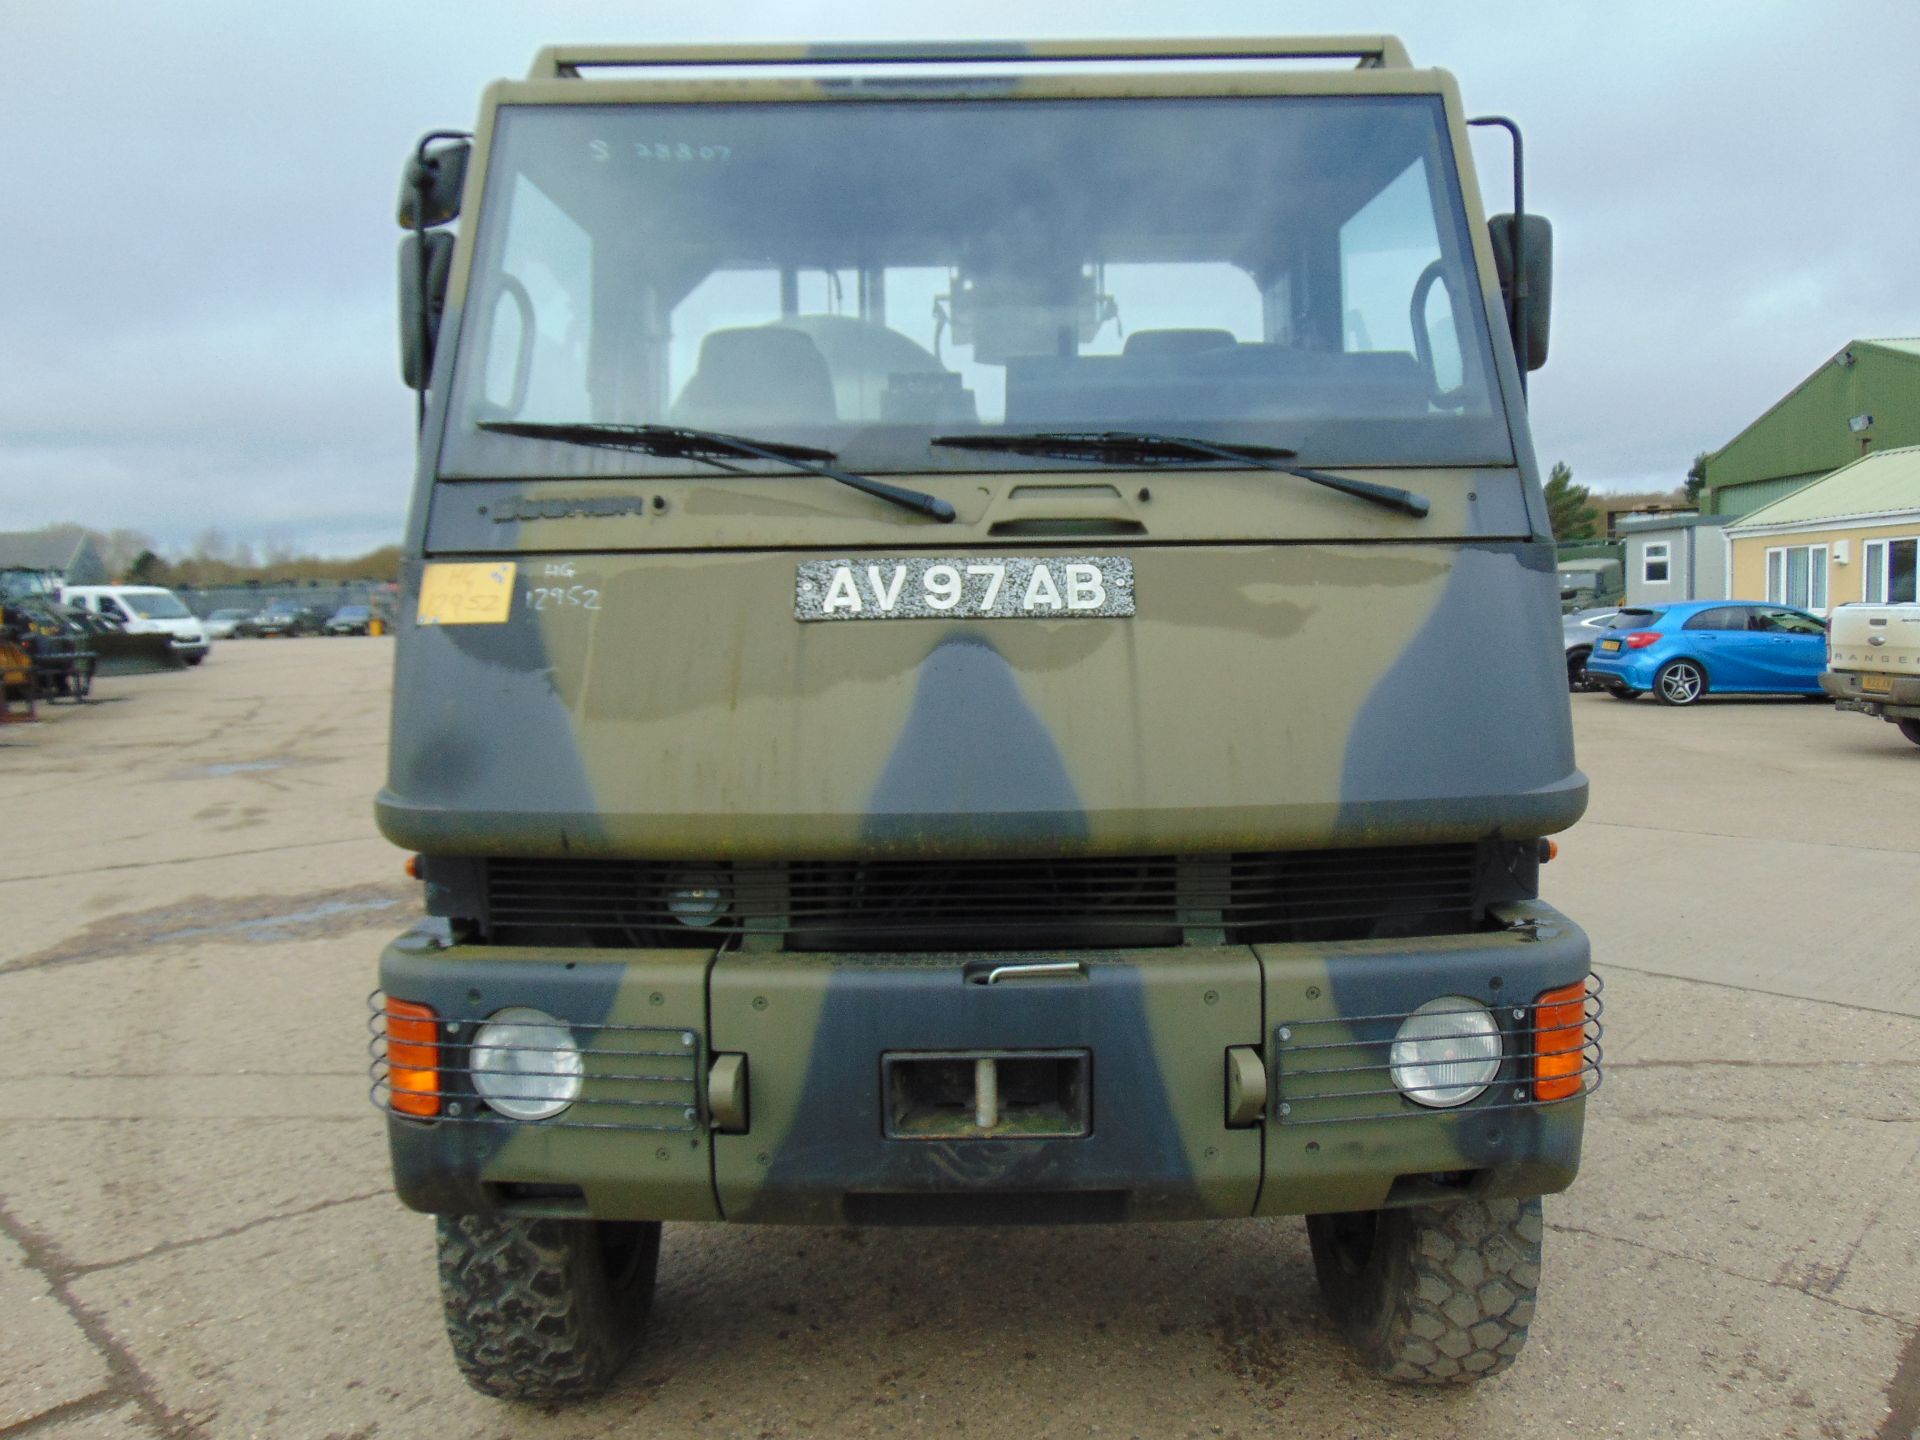 Ex Reserve Left Hand Drive Mowag Bucher Duro II 6x6 High-Mobility Tactical Vehicle - Image 2 of 14